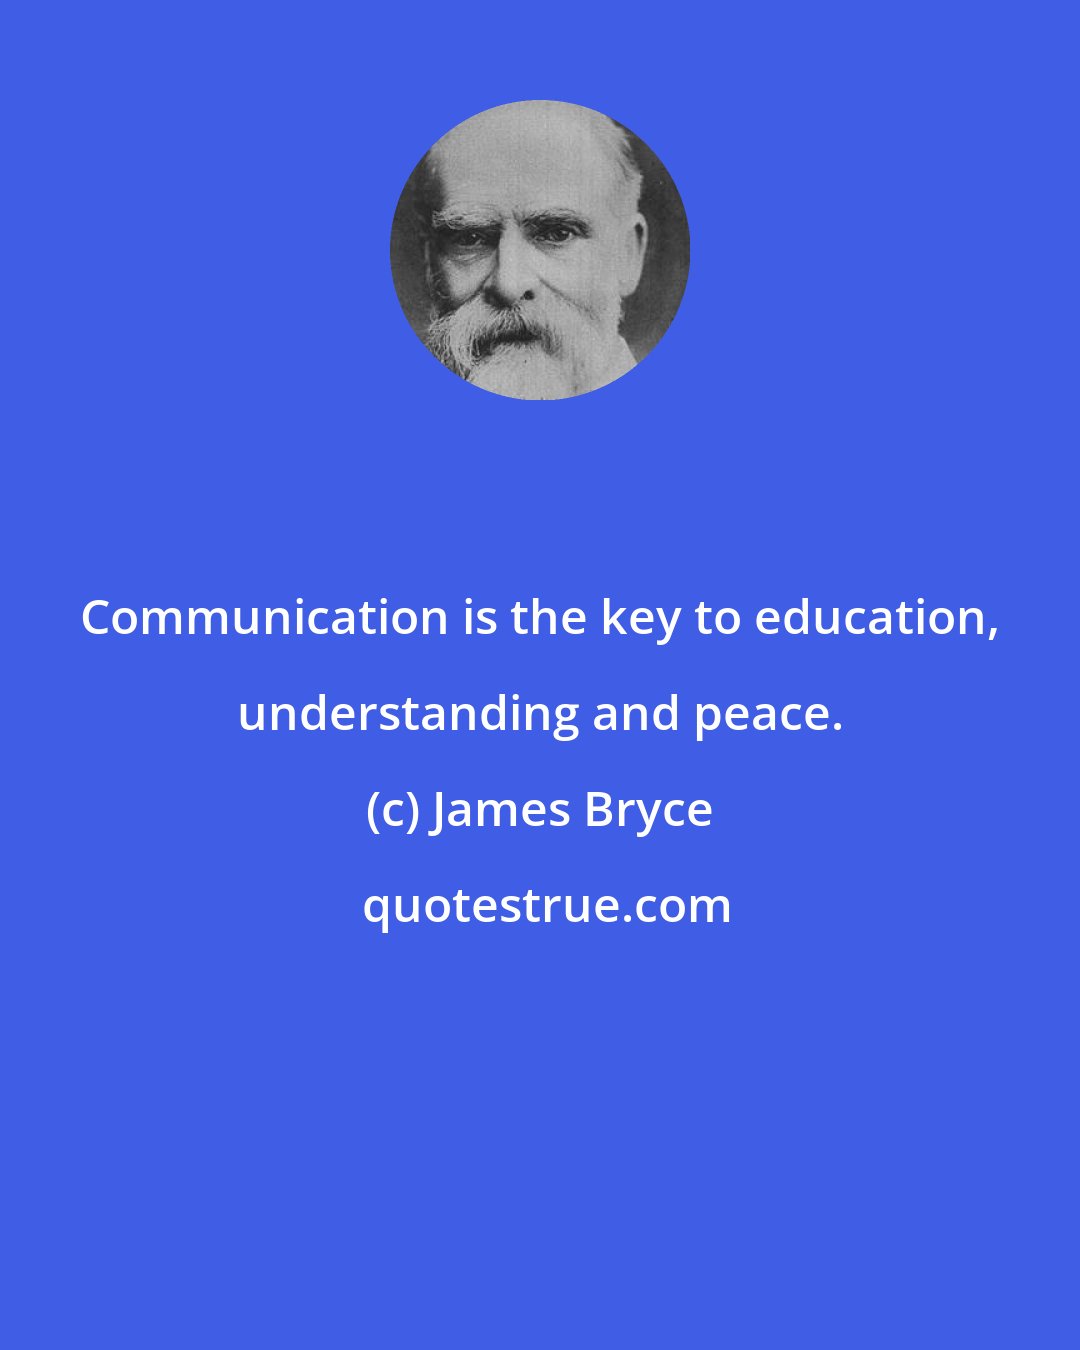 James Bryce: Communication is the key to education, understanding and peace.